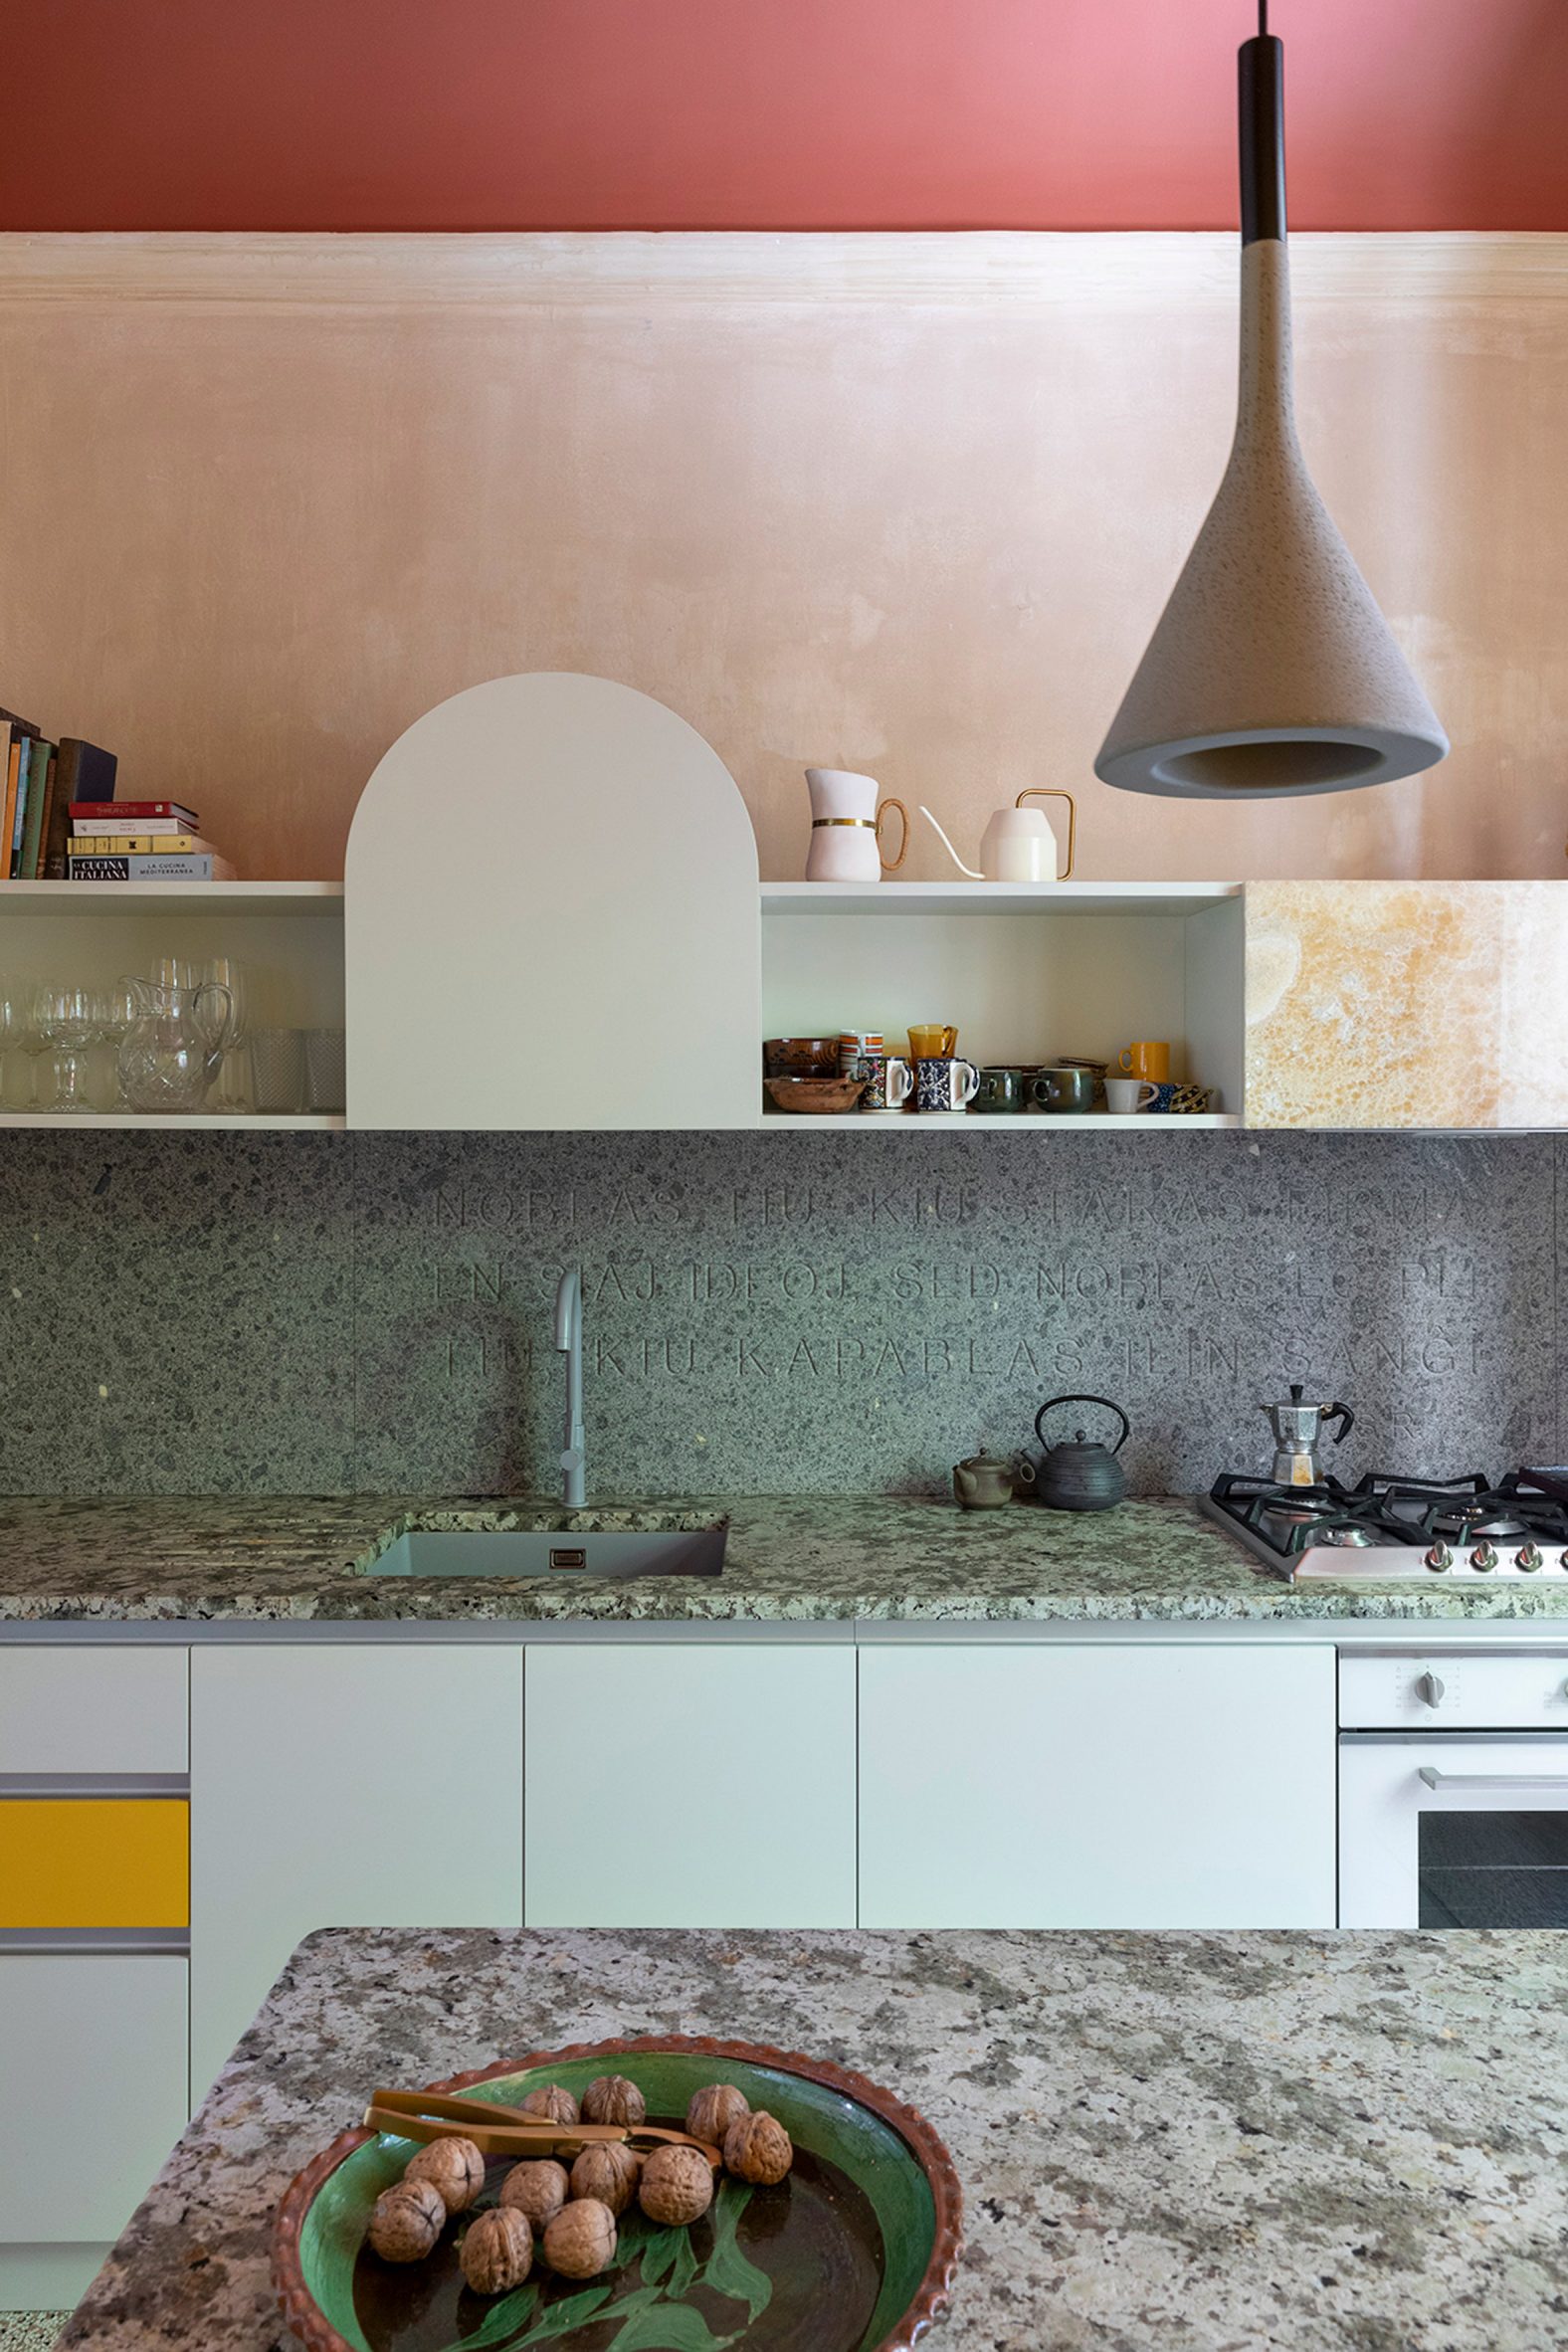 A colourful kitchen with grey granite worktops